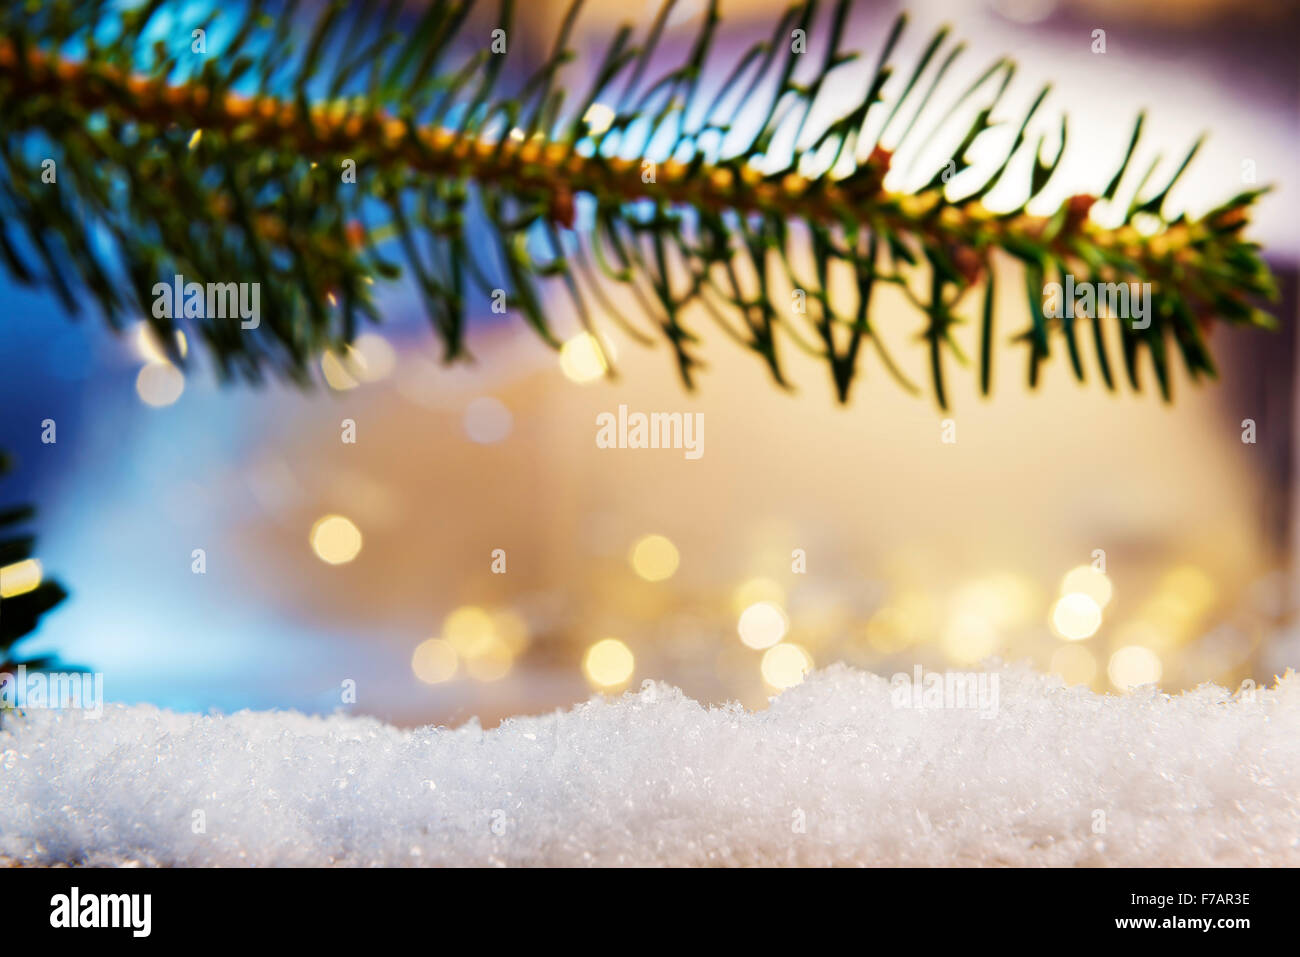 Image of a branch and artificial snow with bokeh lights in background and free space Stock Photo